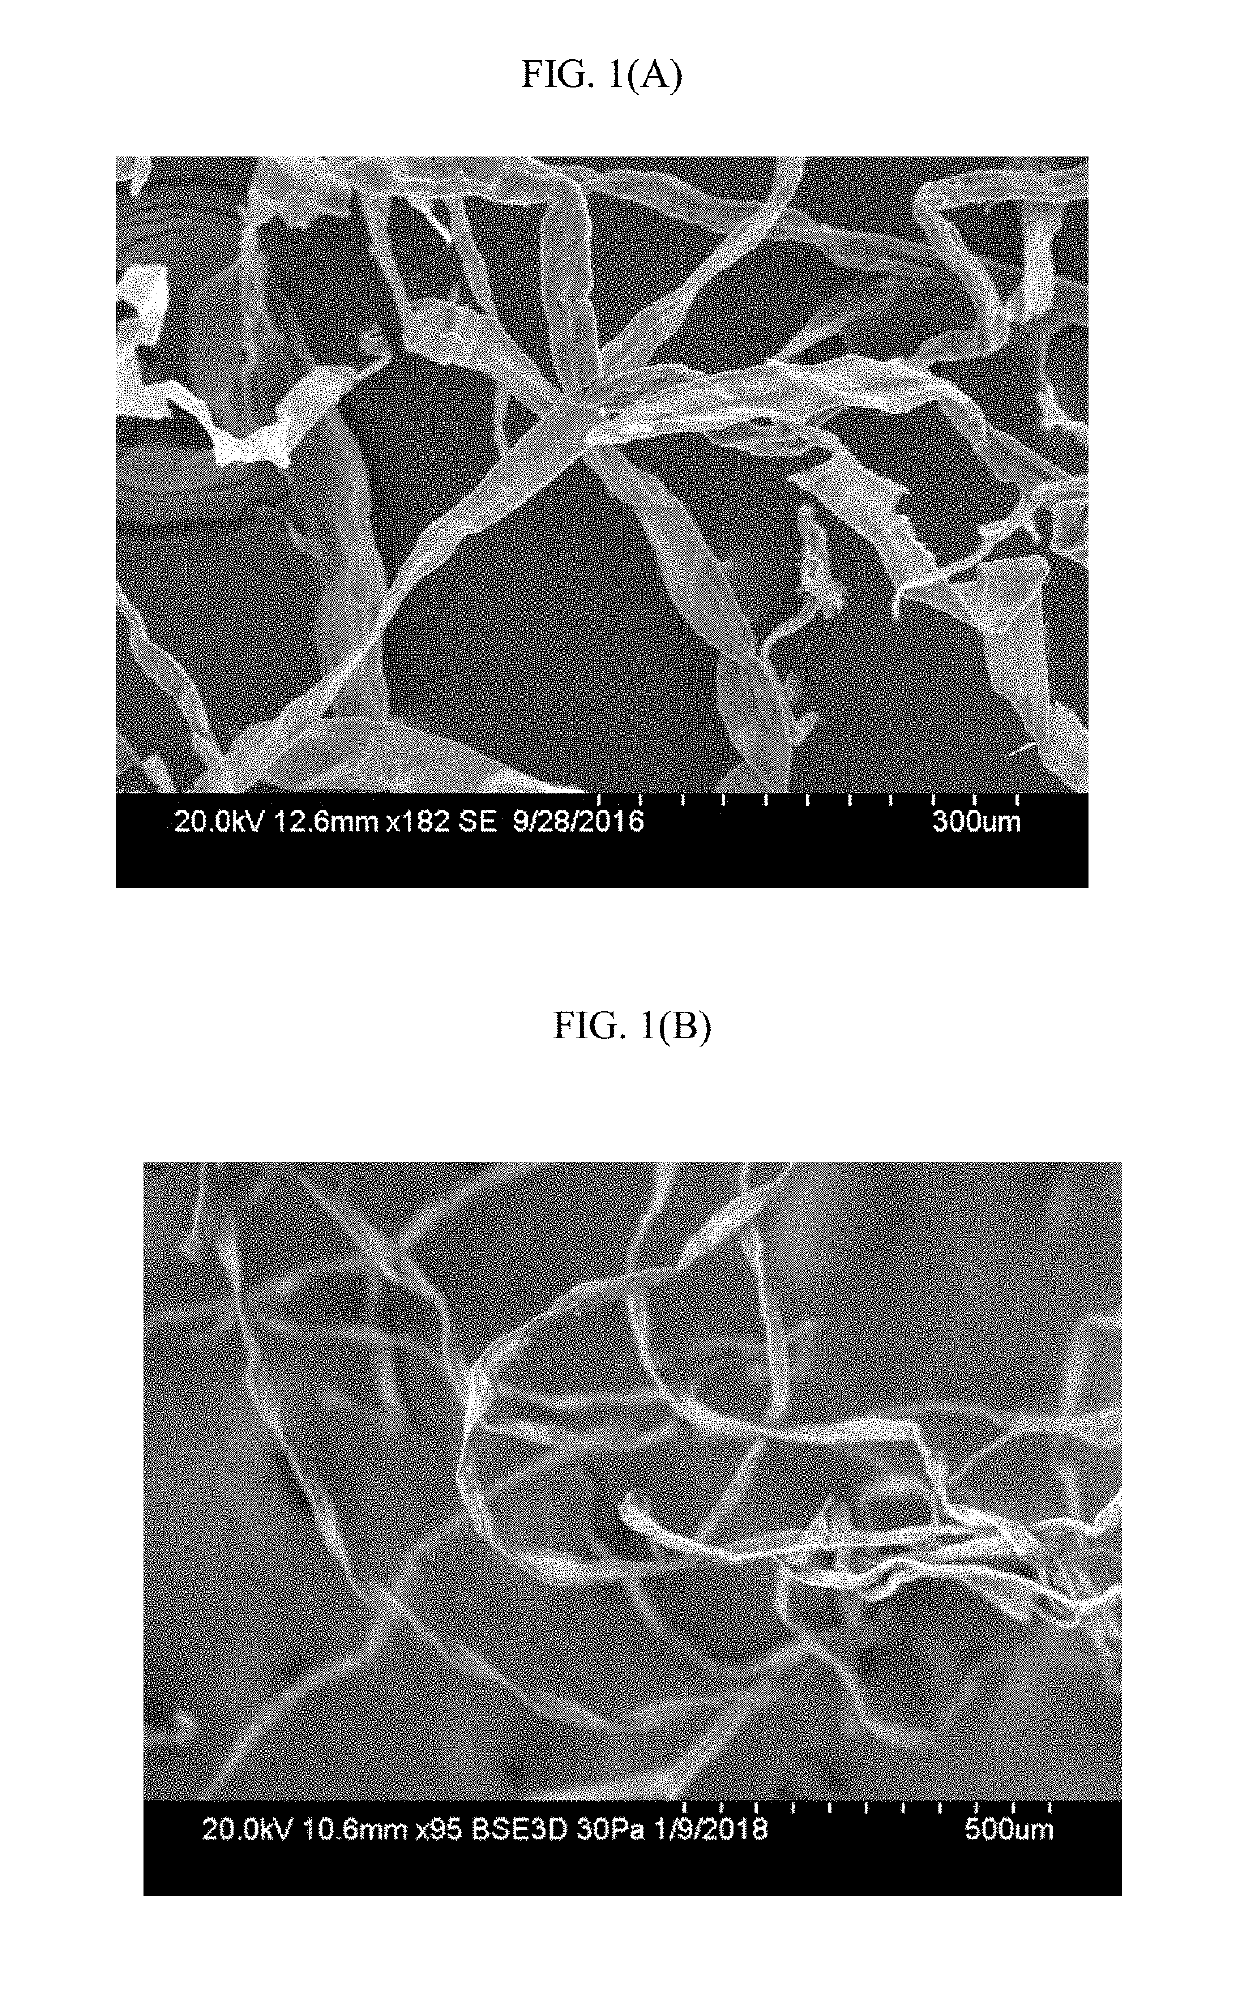 Polyalkylene glycol based reagent with aldehyde end groups suitable for making cellulosic fibers with modified morphology